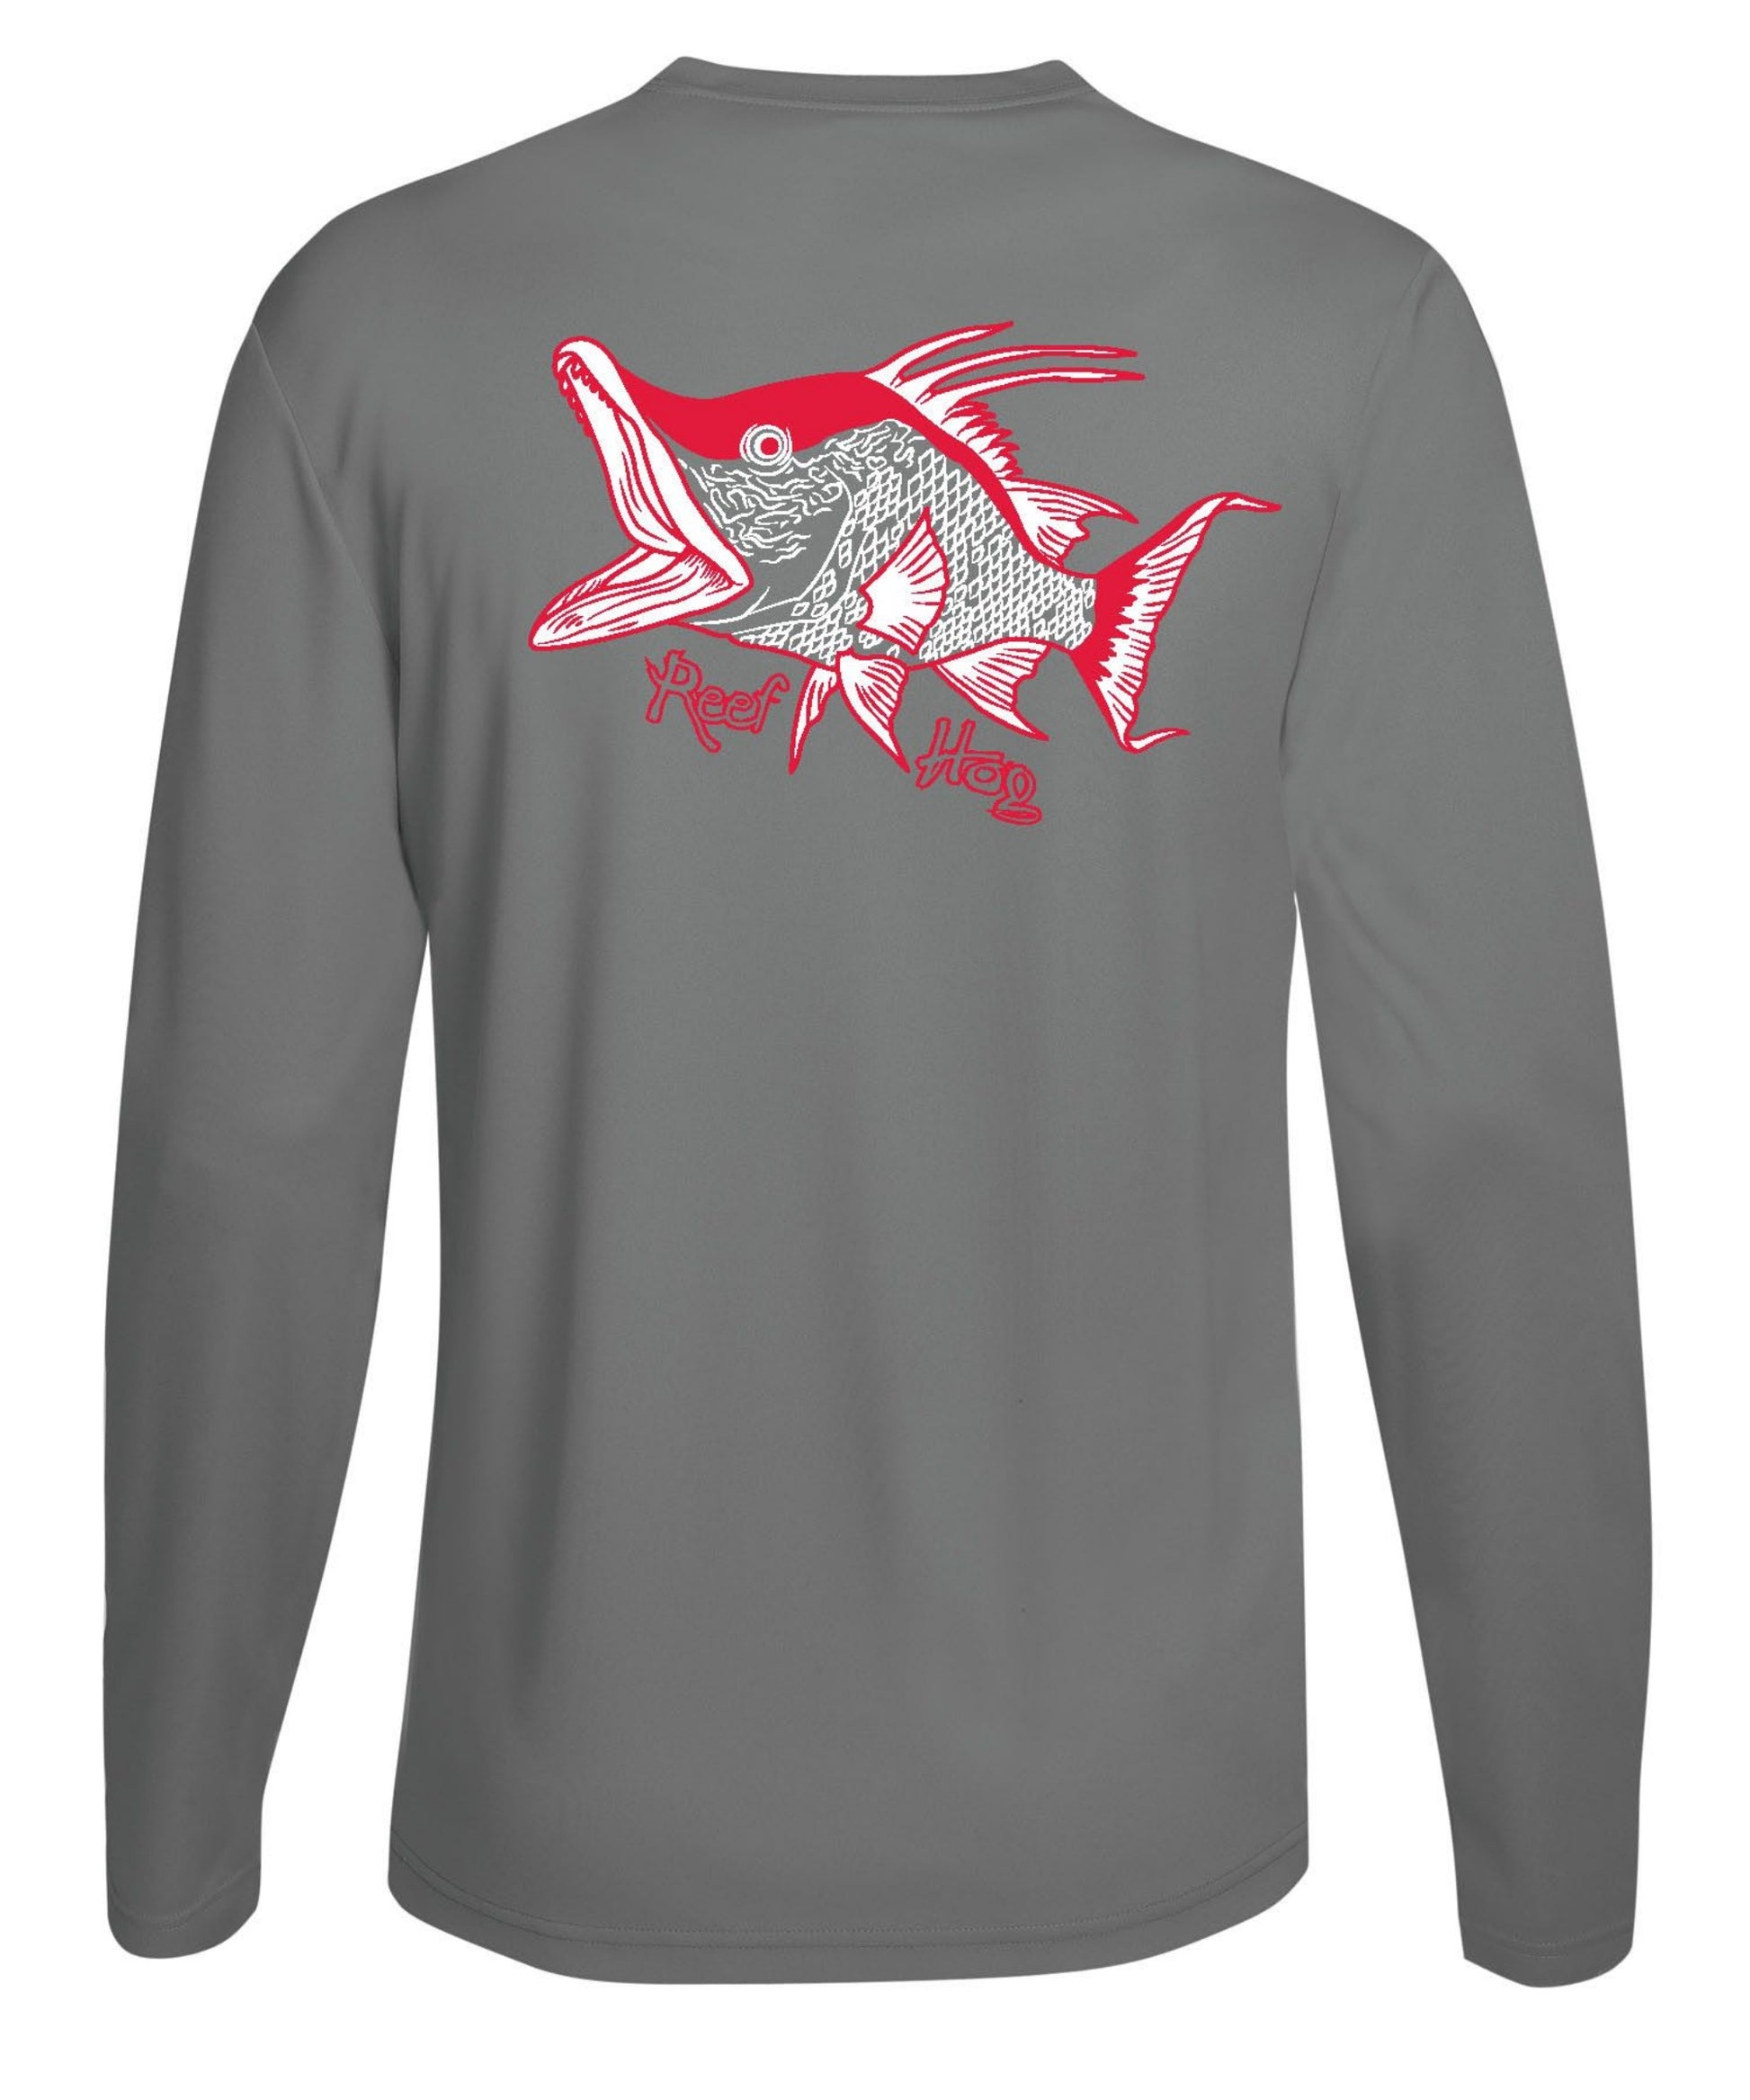 Gray Long Sleeve Hogfish Performance Dry-Fit Sun Protection Shirt with 50+ UV Protection by Reel Fishy Apparel